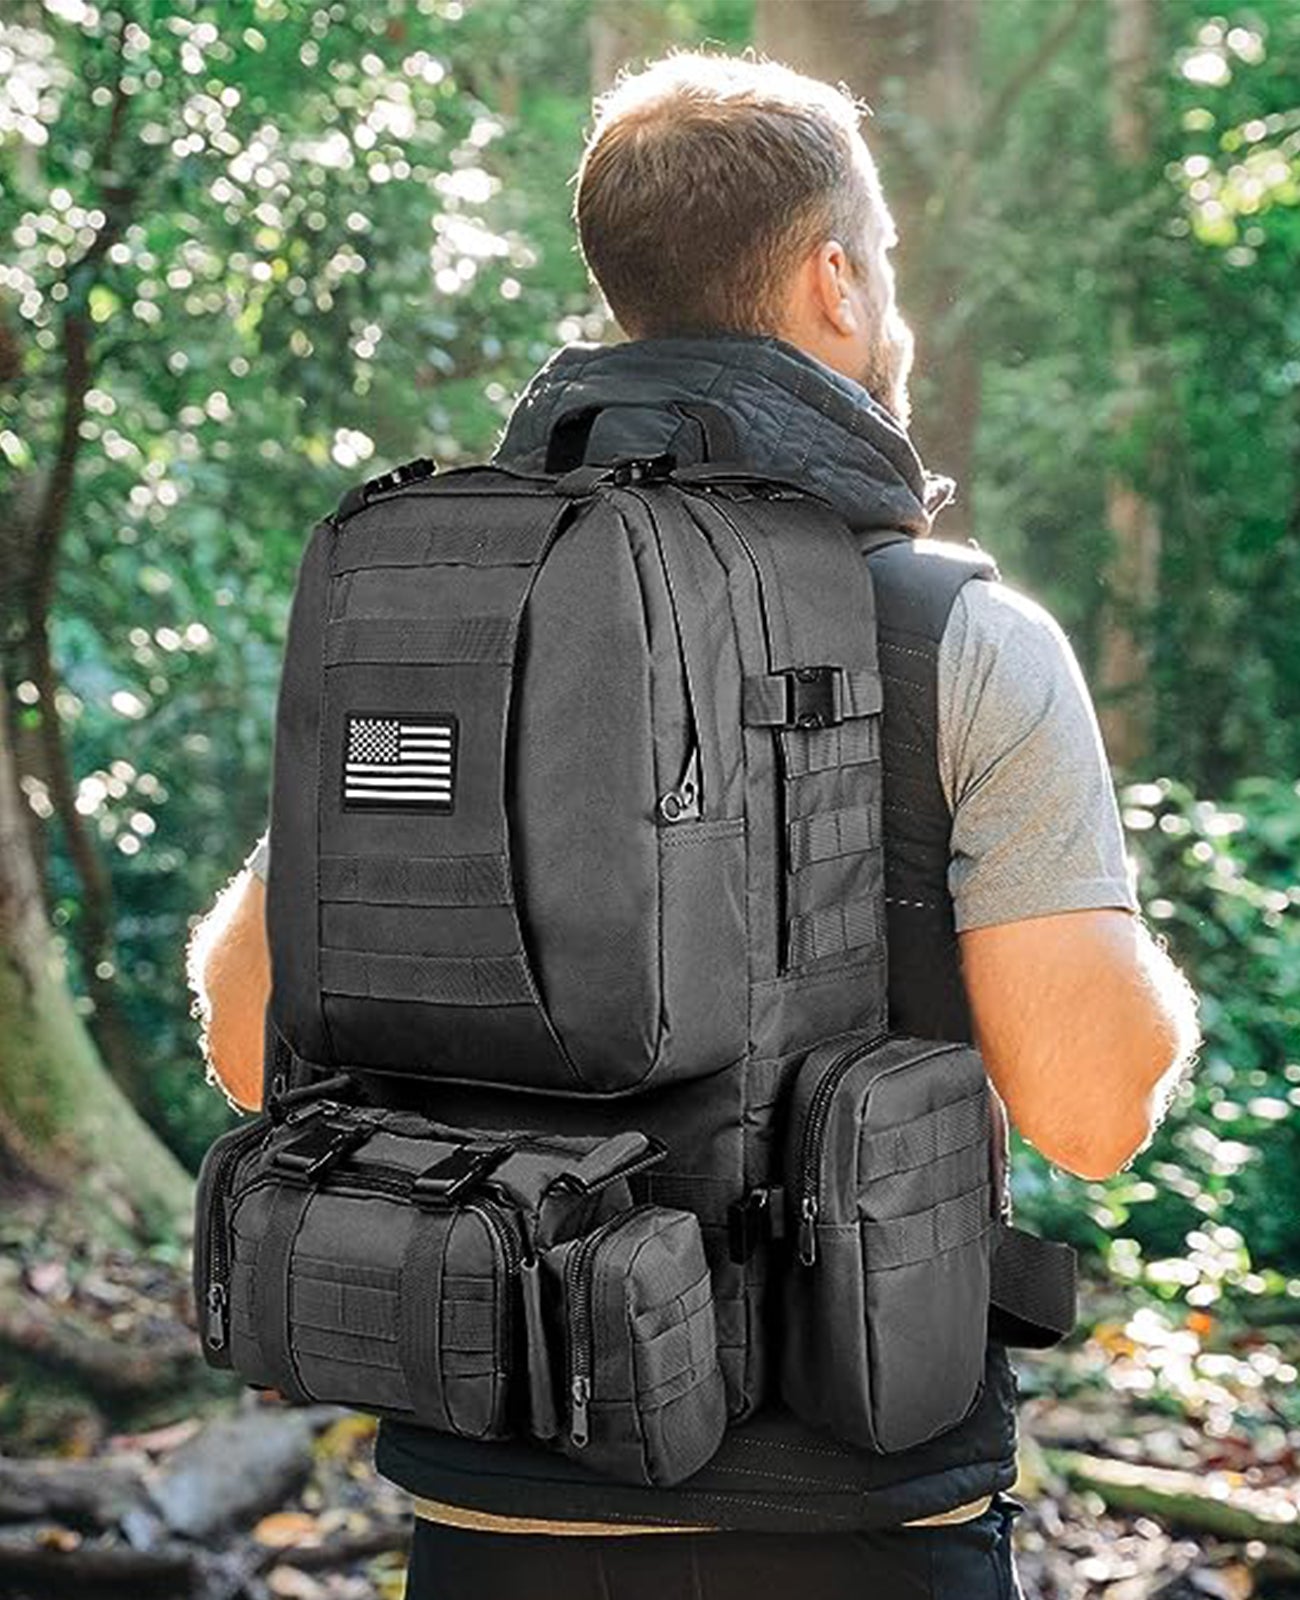 CVLIFE Tactical Backpack Military Army Rucksack 60L Large